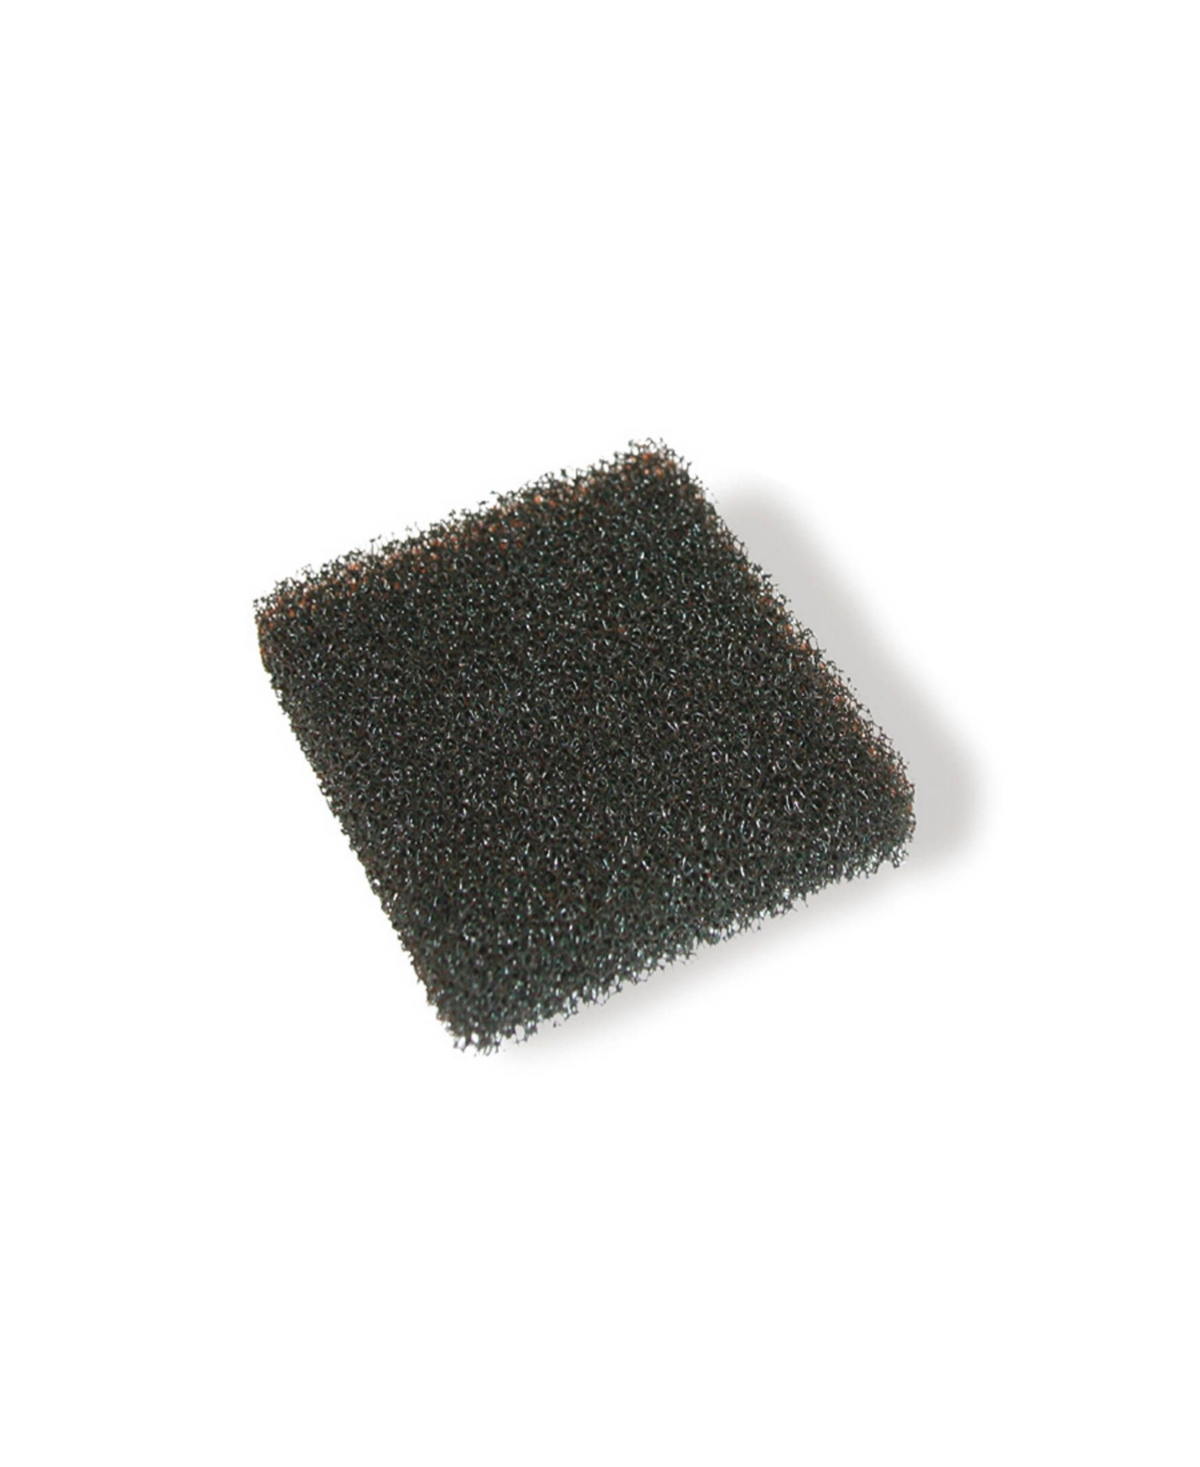 Sports Replacement Filter Pad for Above Ground Pool Cover Pumps - Black